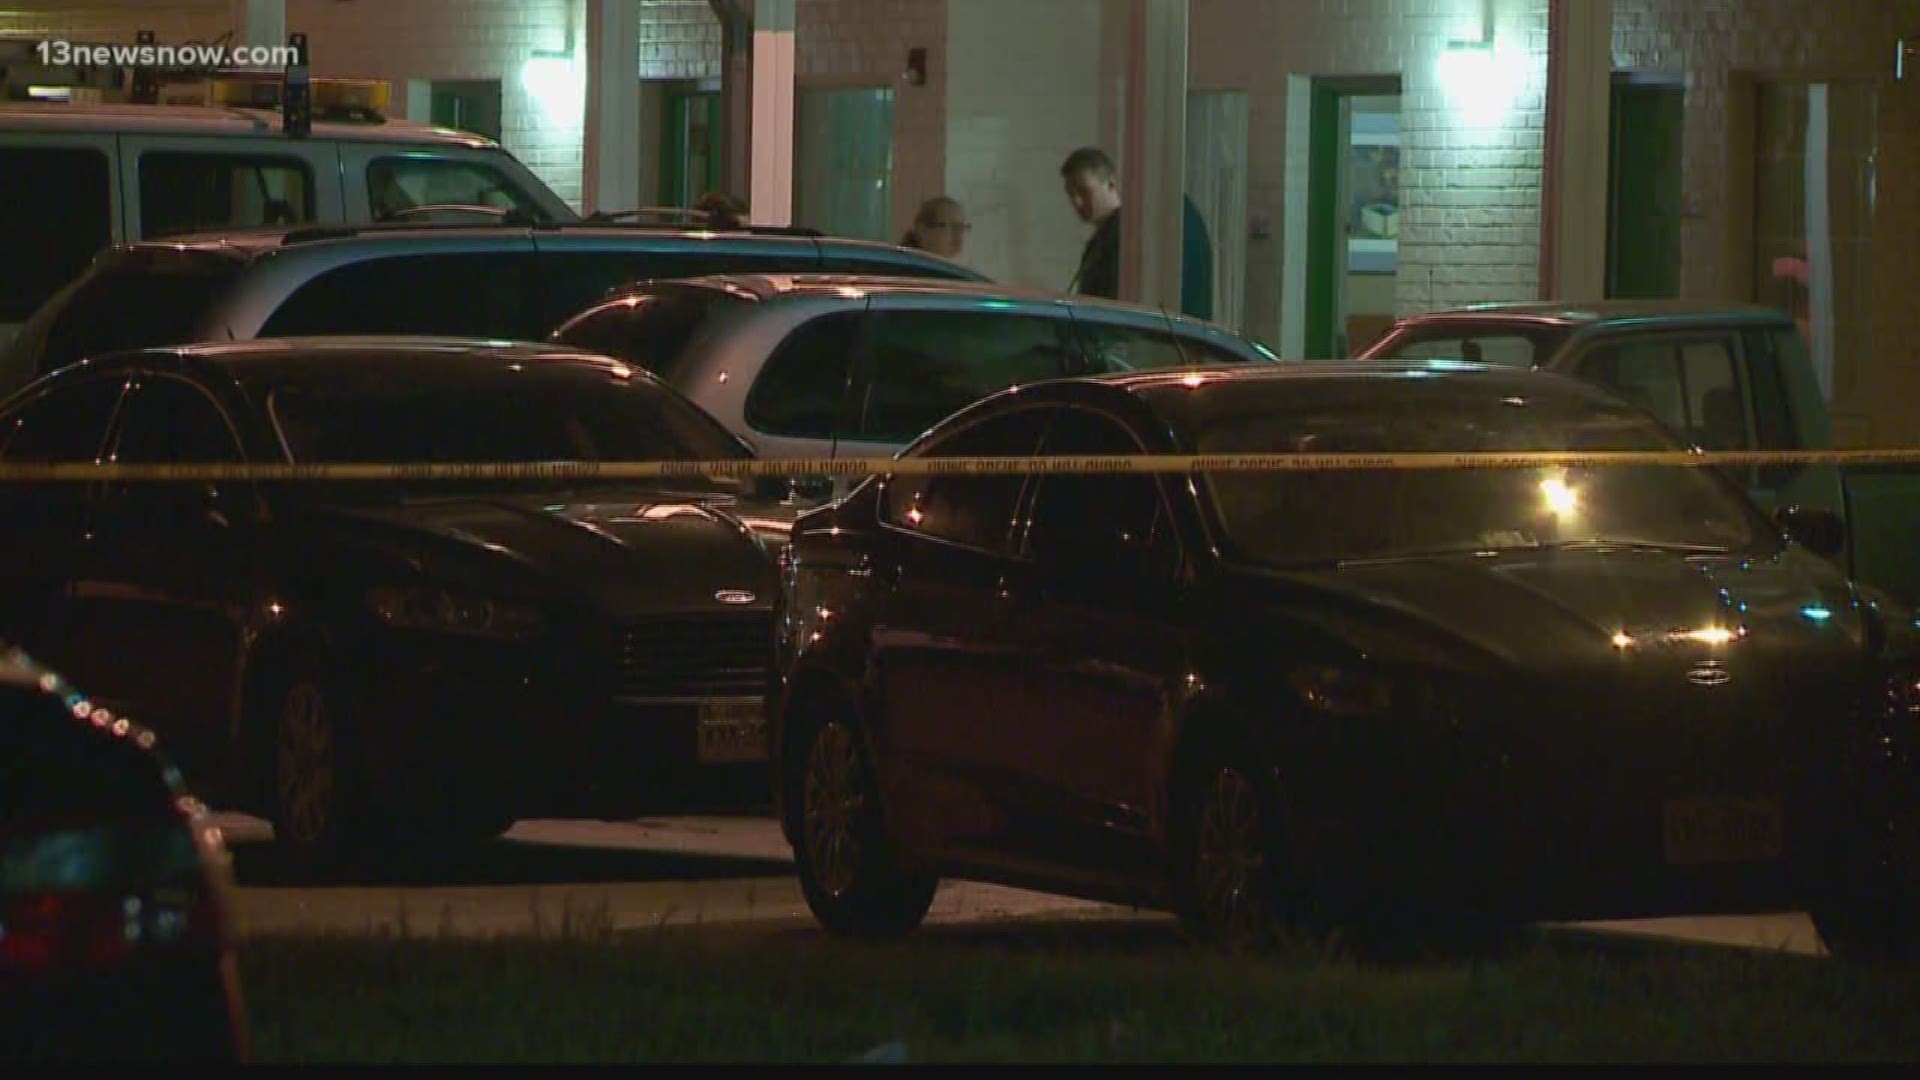 A man was found dead inside an Inn Suites room after an hours-long barricade situation in Chesapeake early Wednesday morning, police said.